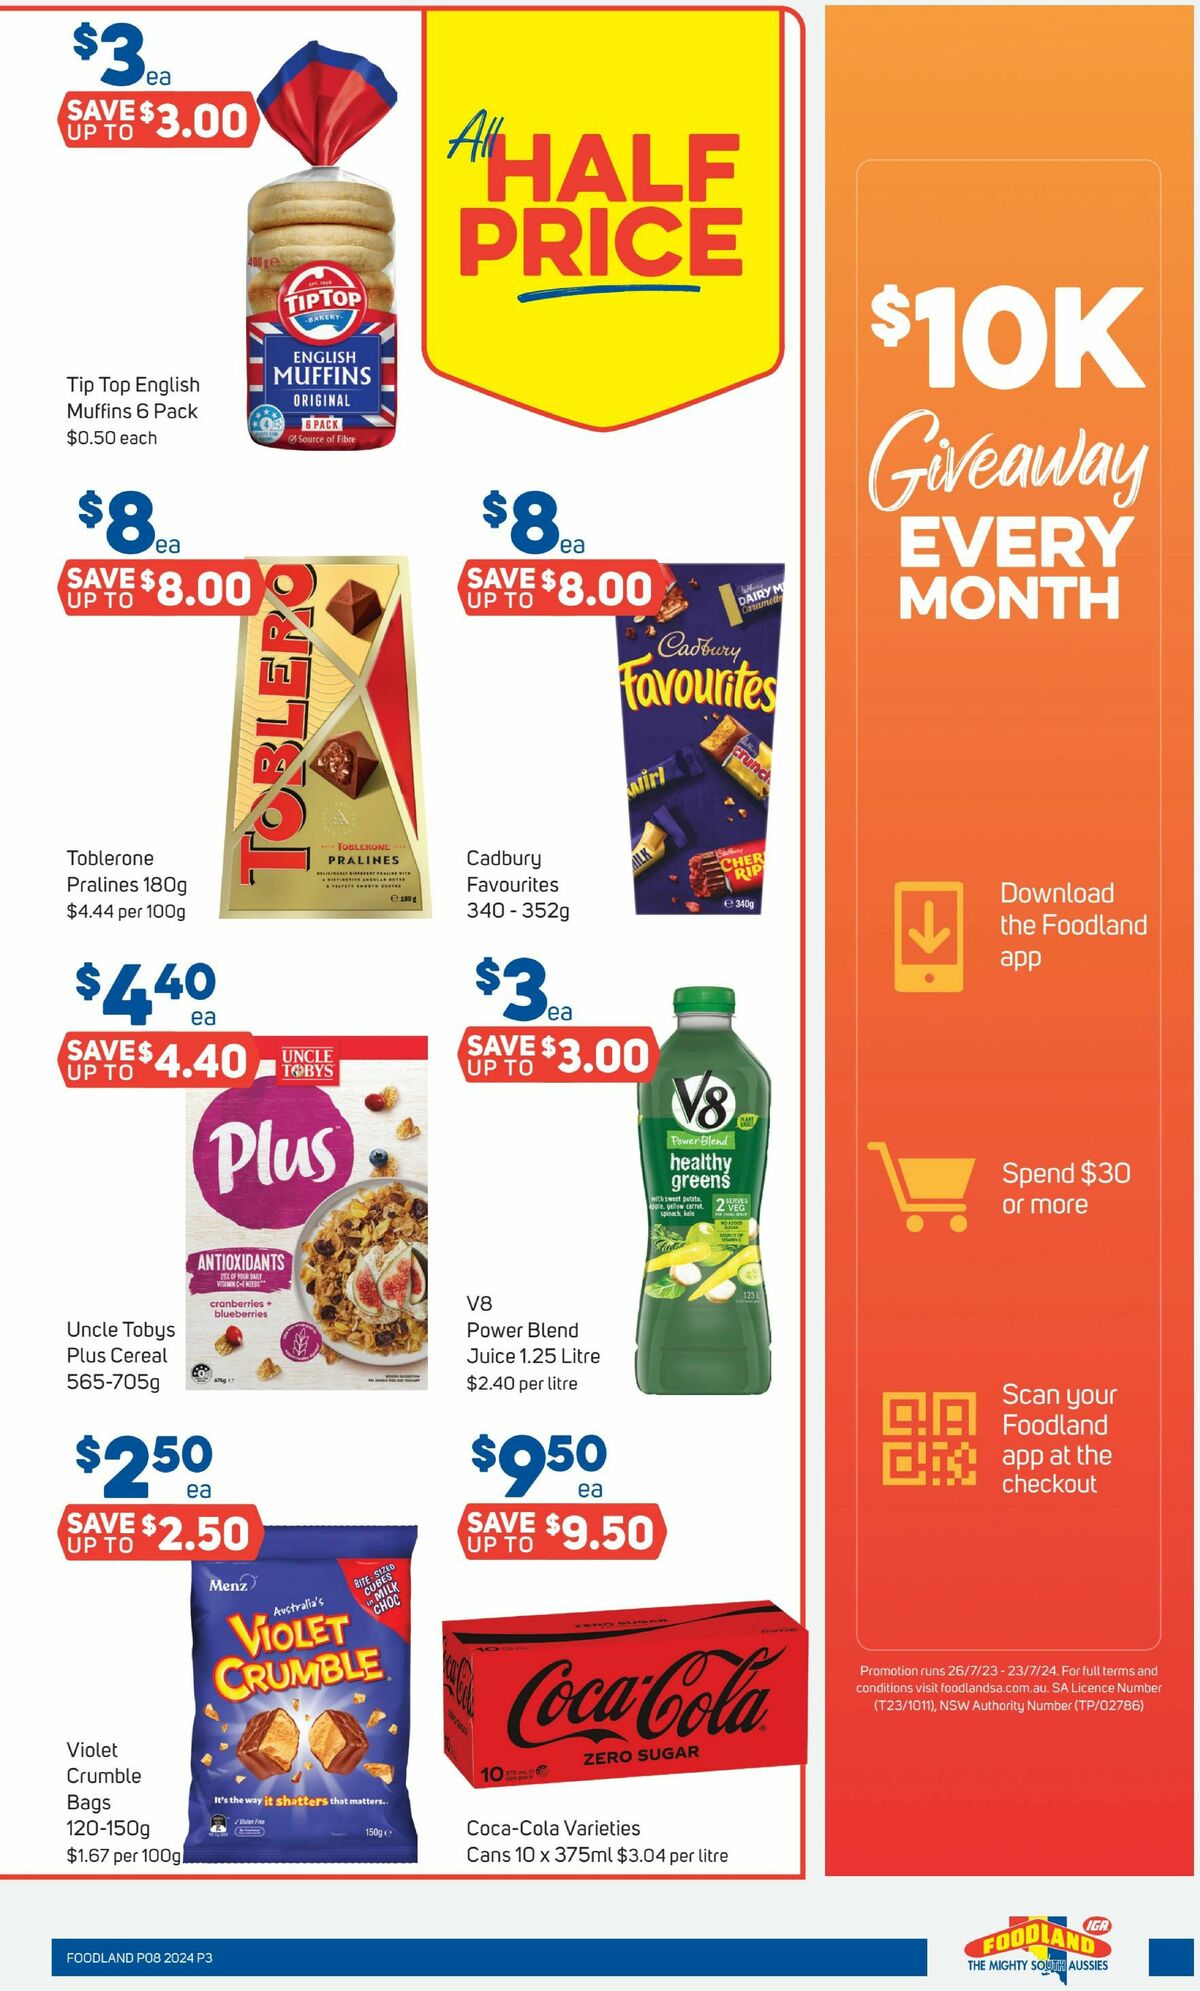 Foodland Catalogues from 21 February